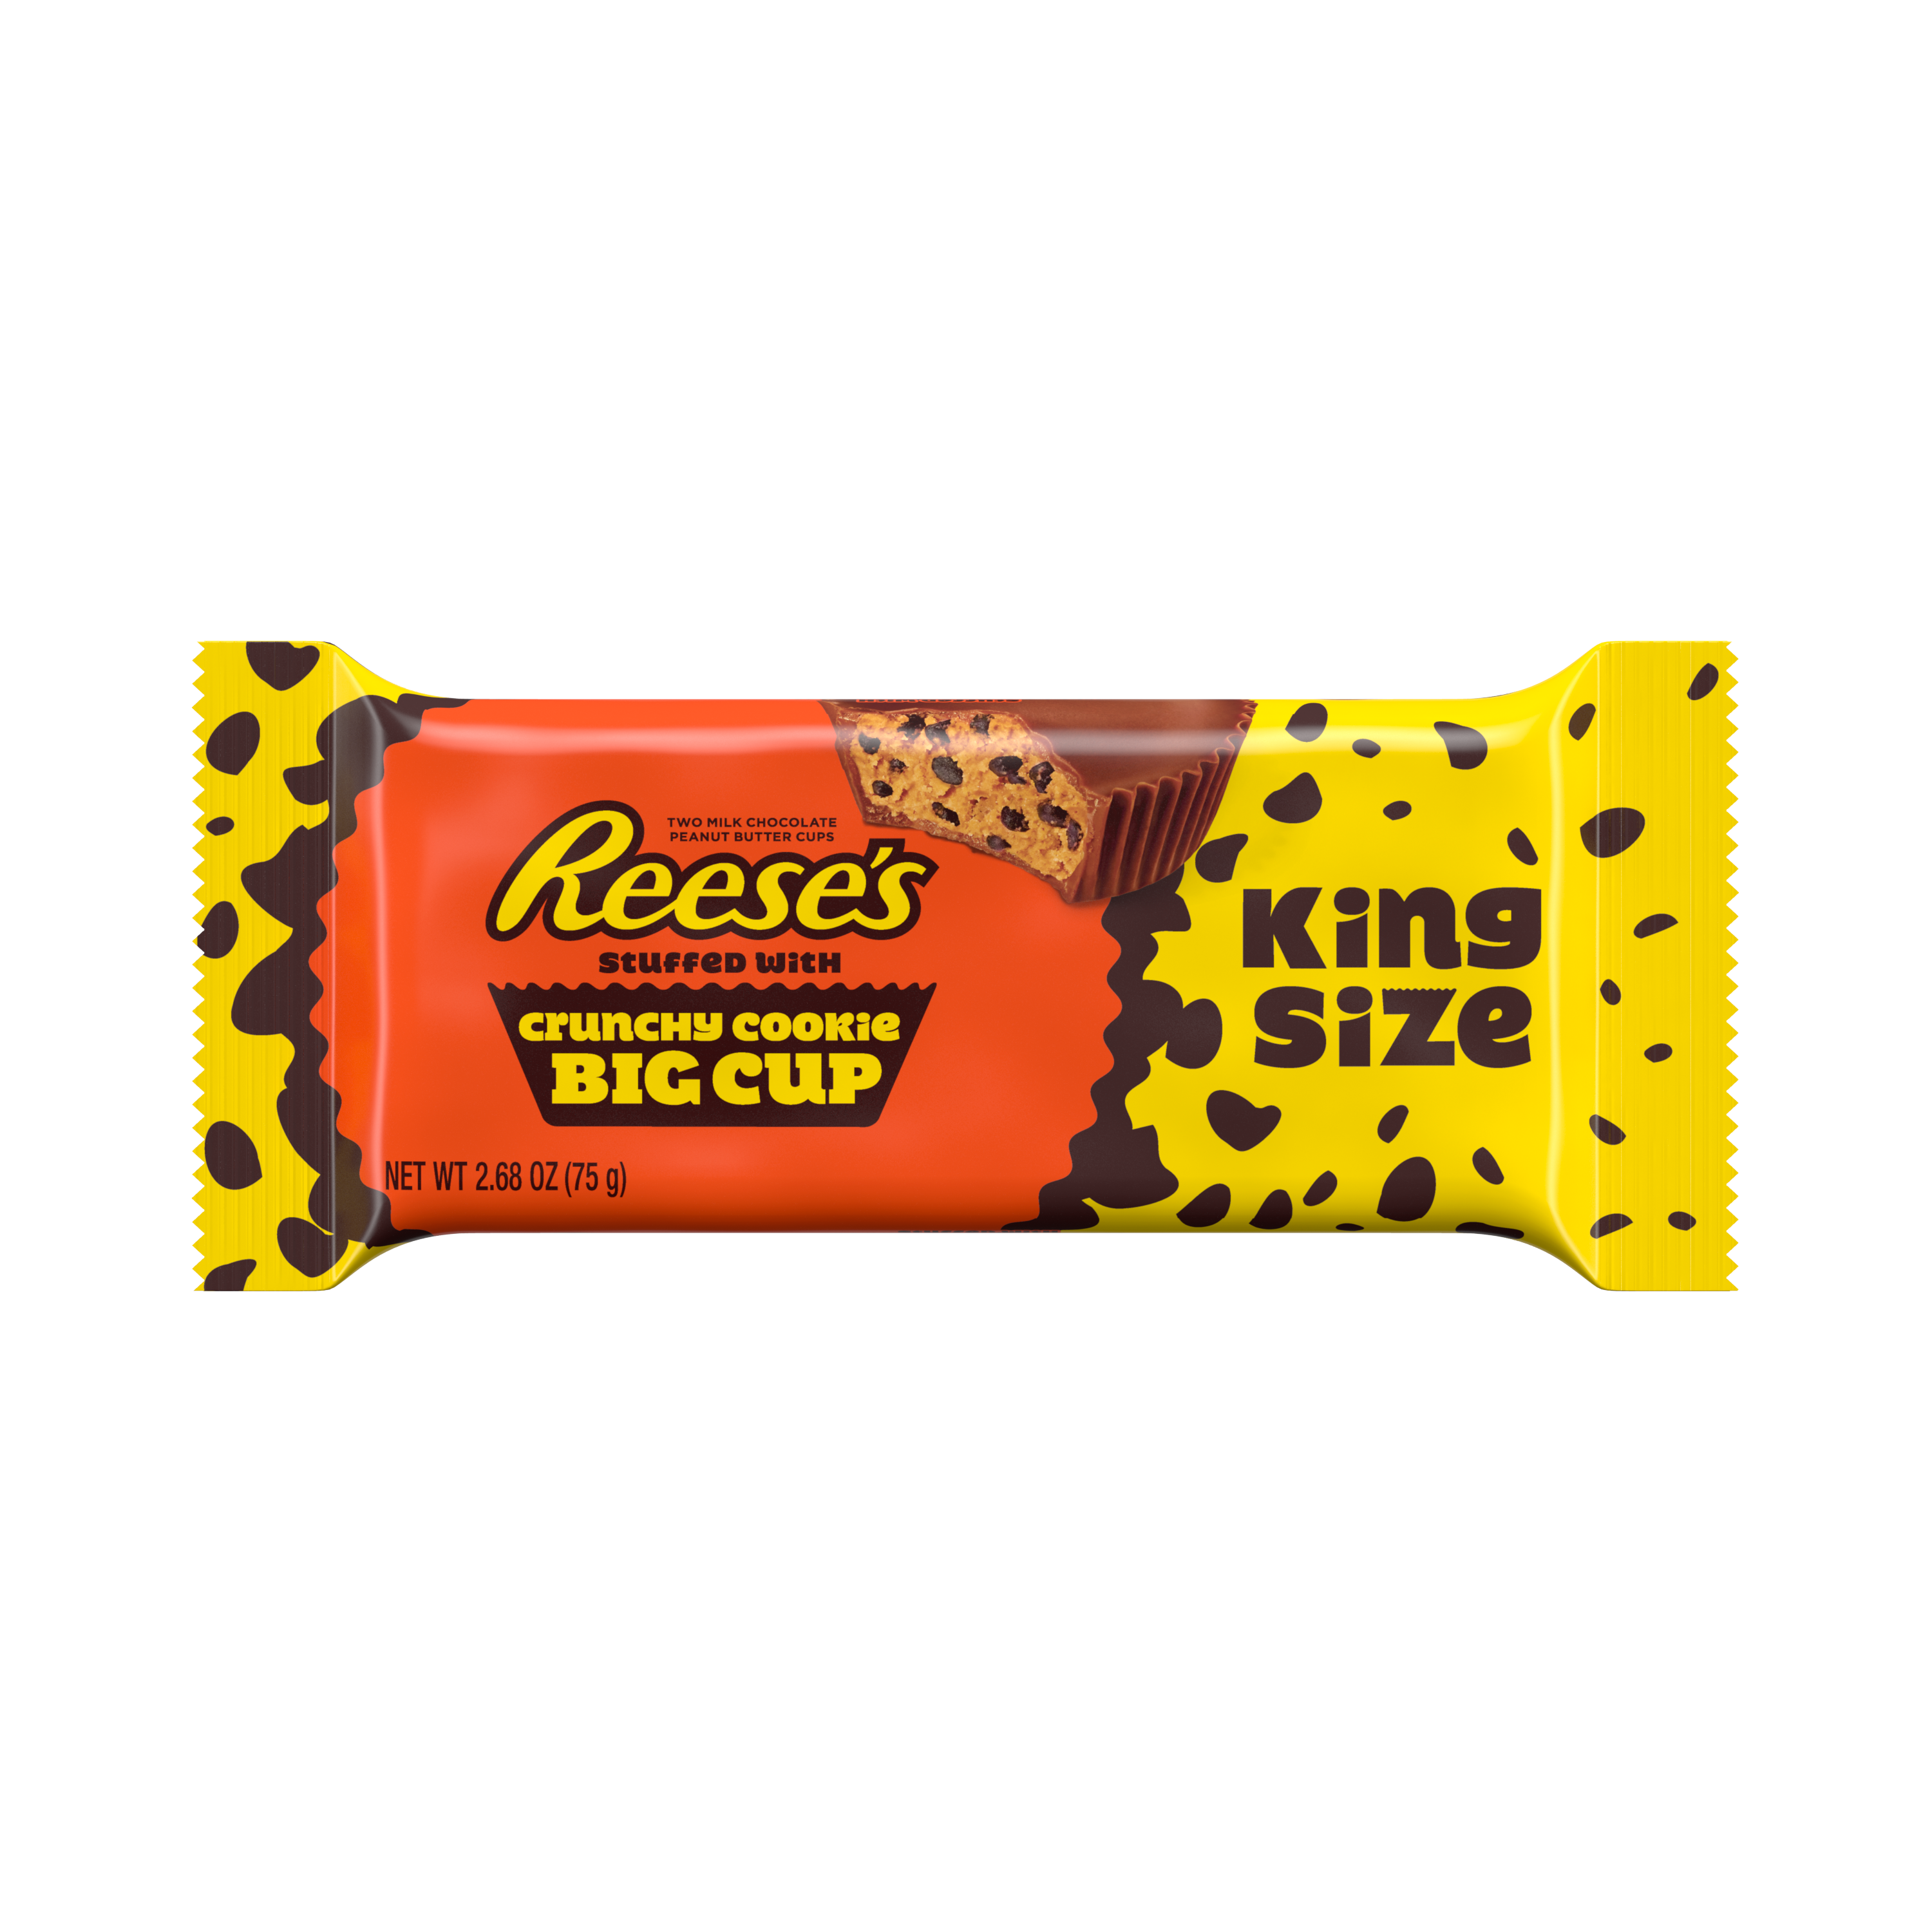 REESE'S Big Cup Stuffed With Crunchy Cookie King Size Peanut Butter Cups, 2.68 oz - Front of Package